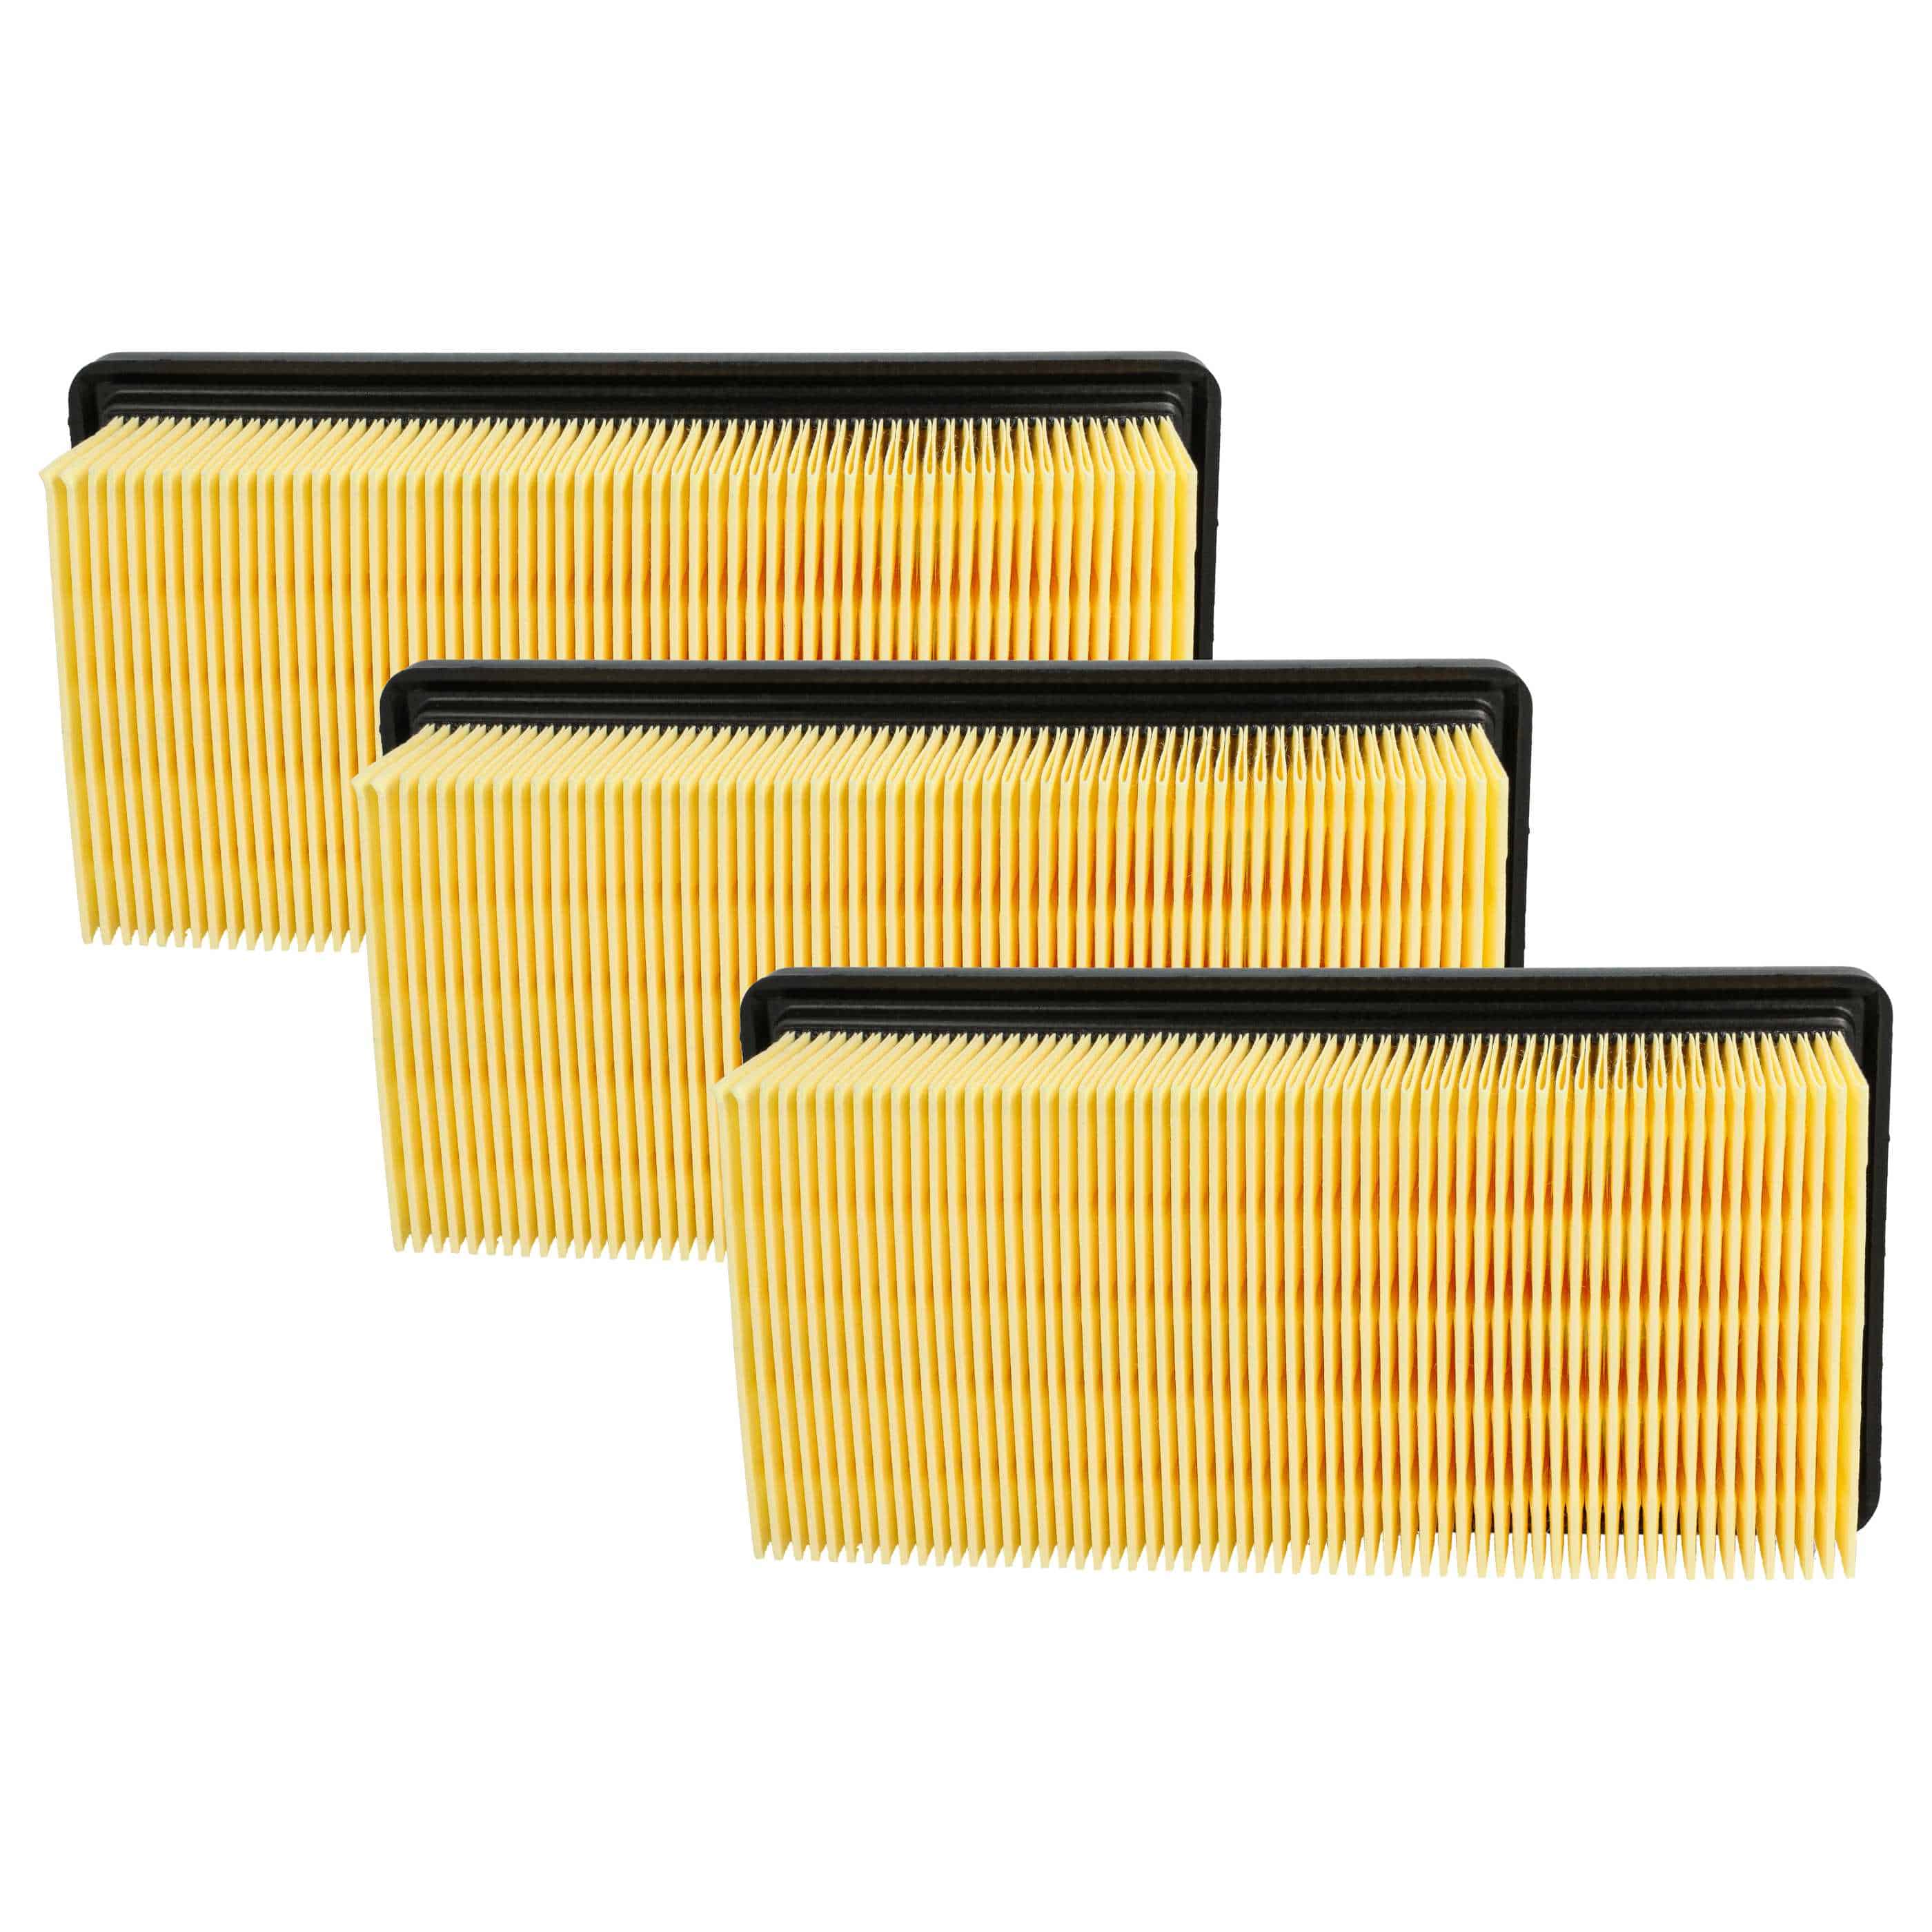 3x flat pleated filter replaces Kärcher 6.414-971.0 for KärcherVacuum Cleaner